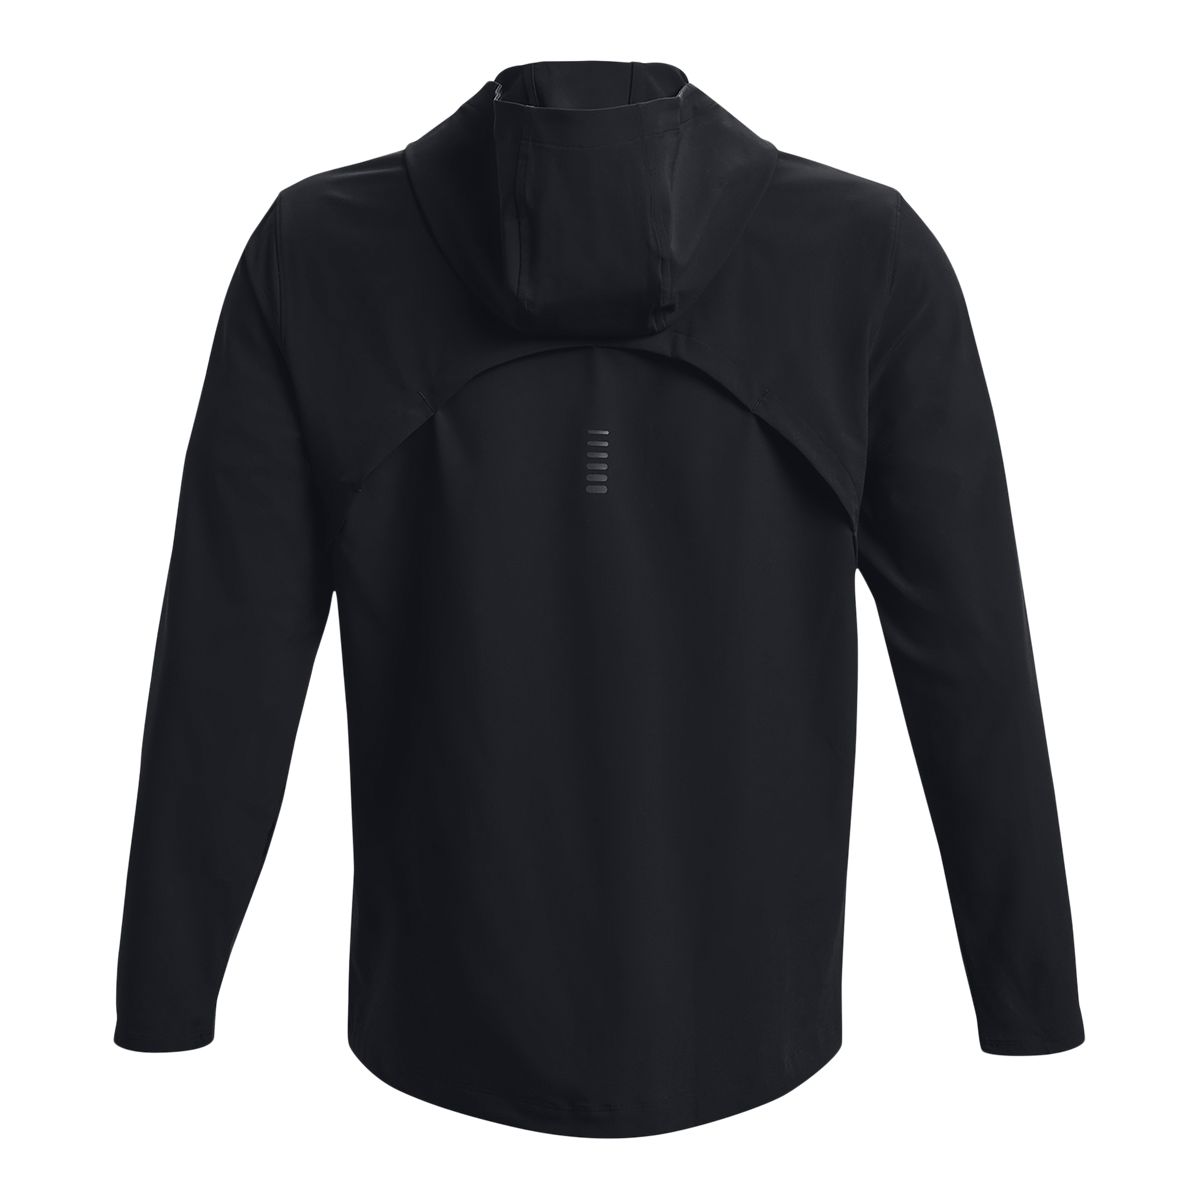 UNDER ARMOUR Mens Outrun the Storm Jacket Black